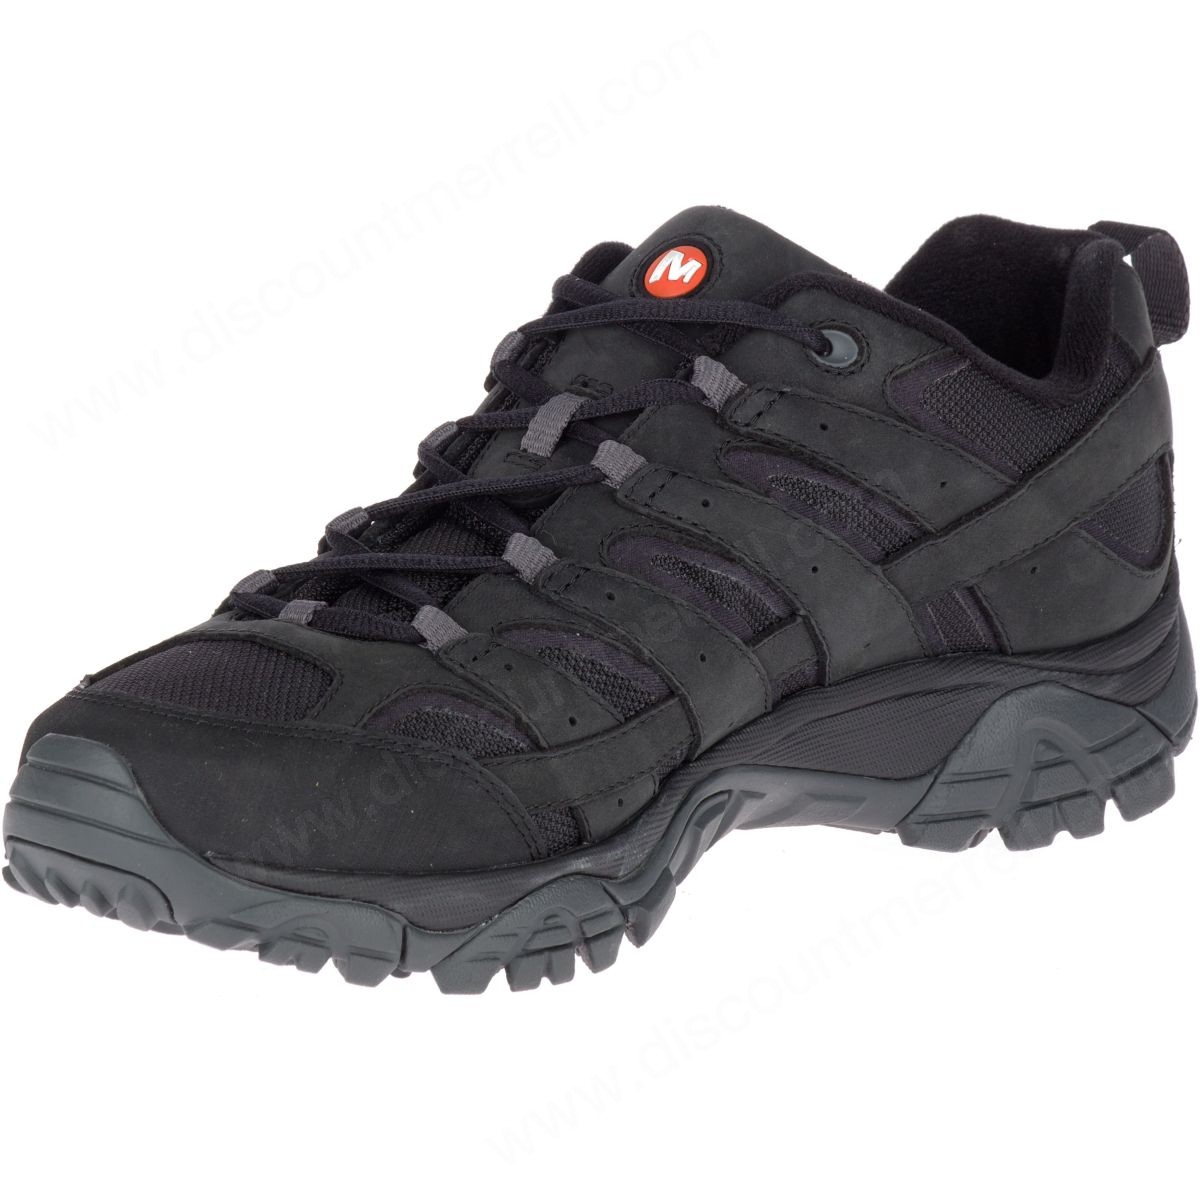 Merrell Man's Moab Mother Of All Boots™ Smooth Black - -5